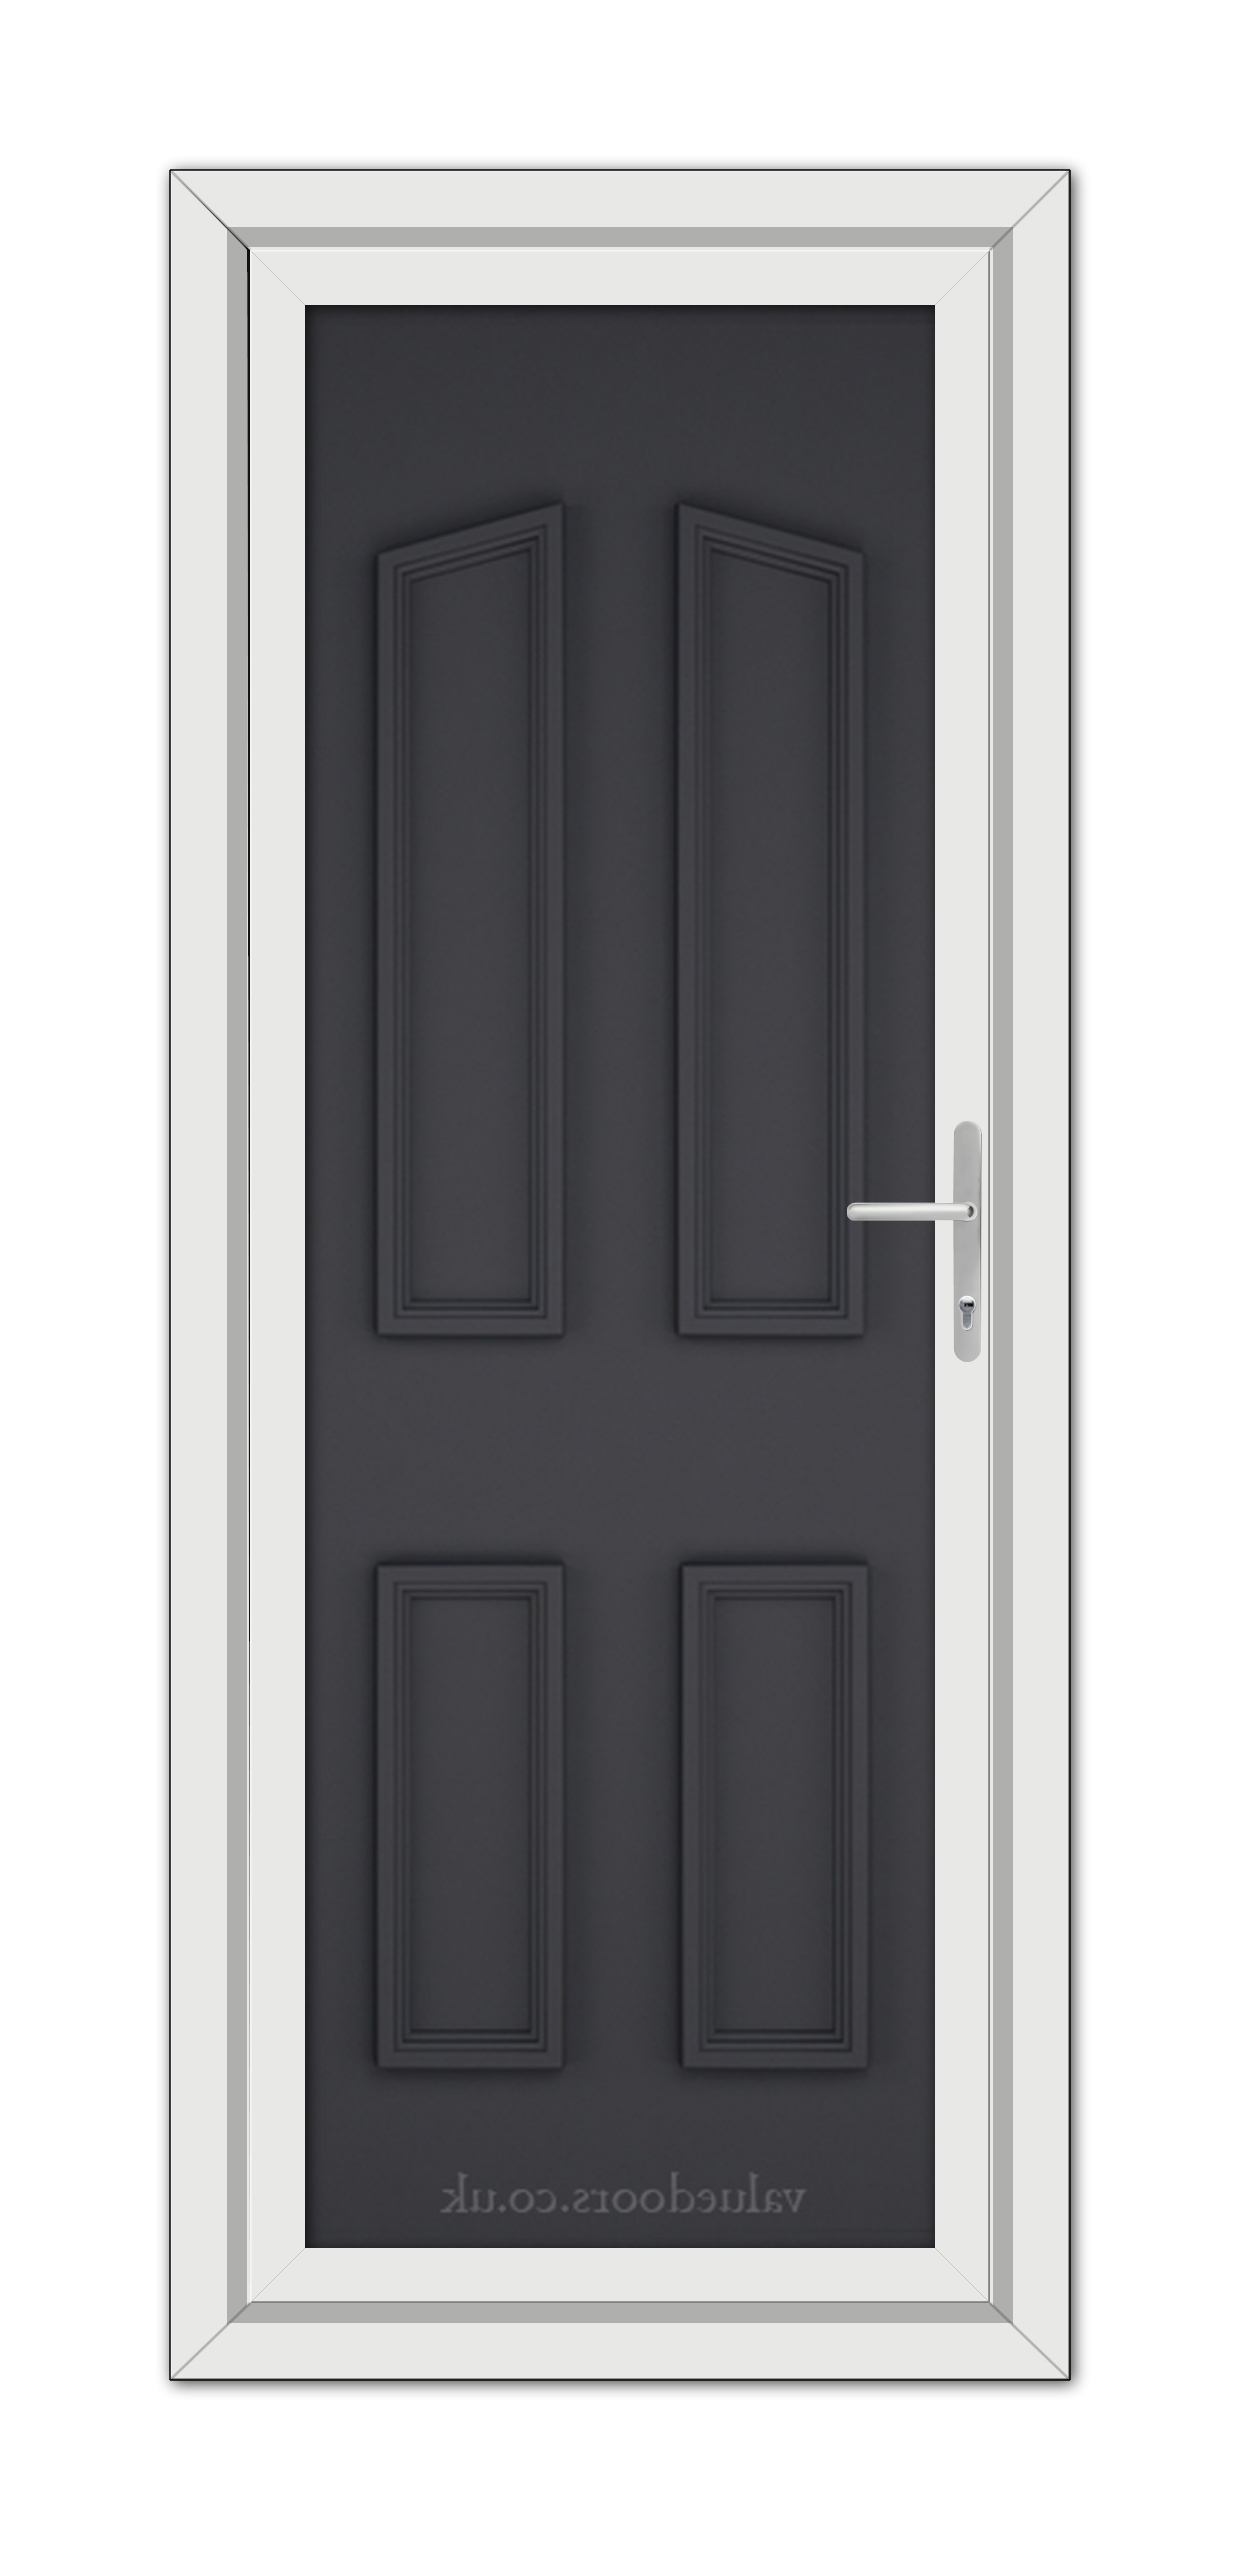 A modern, vertical-format image of a closed, Grey Kensington Solid uPVC Door with four panels and a metallic handle, set within a white frame.